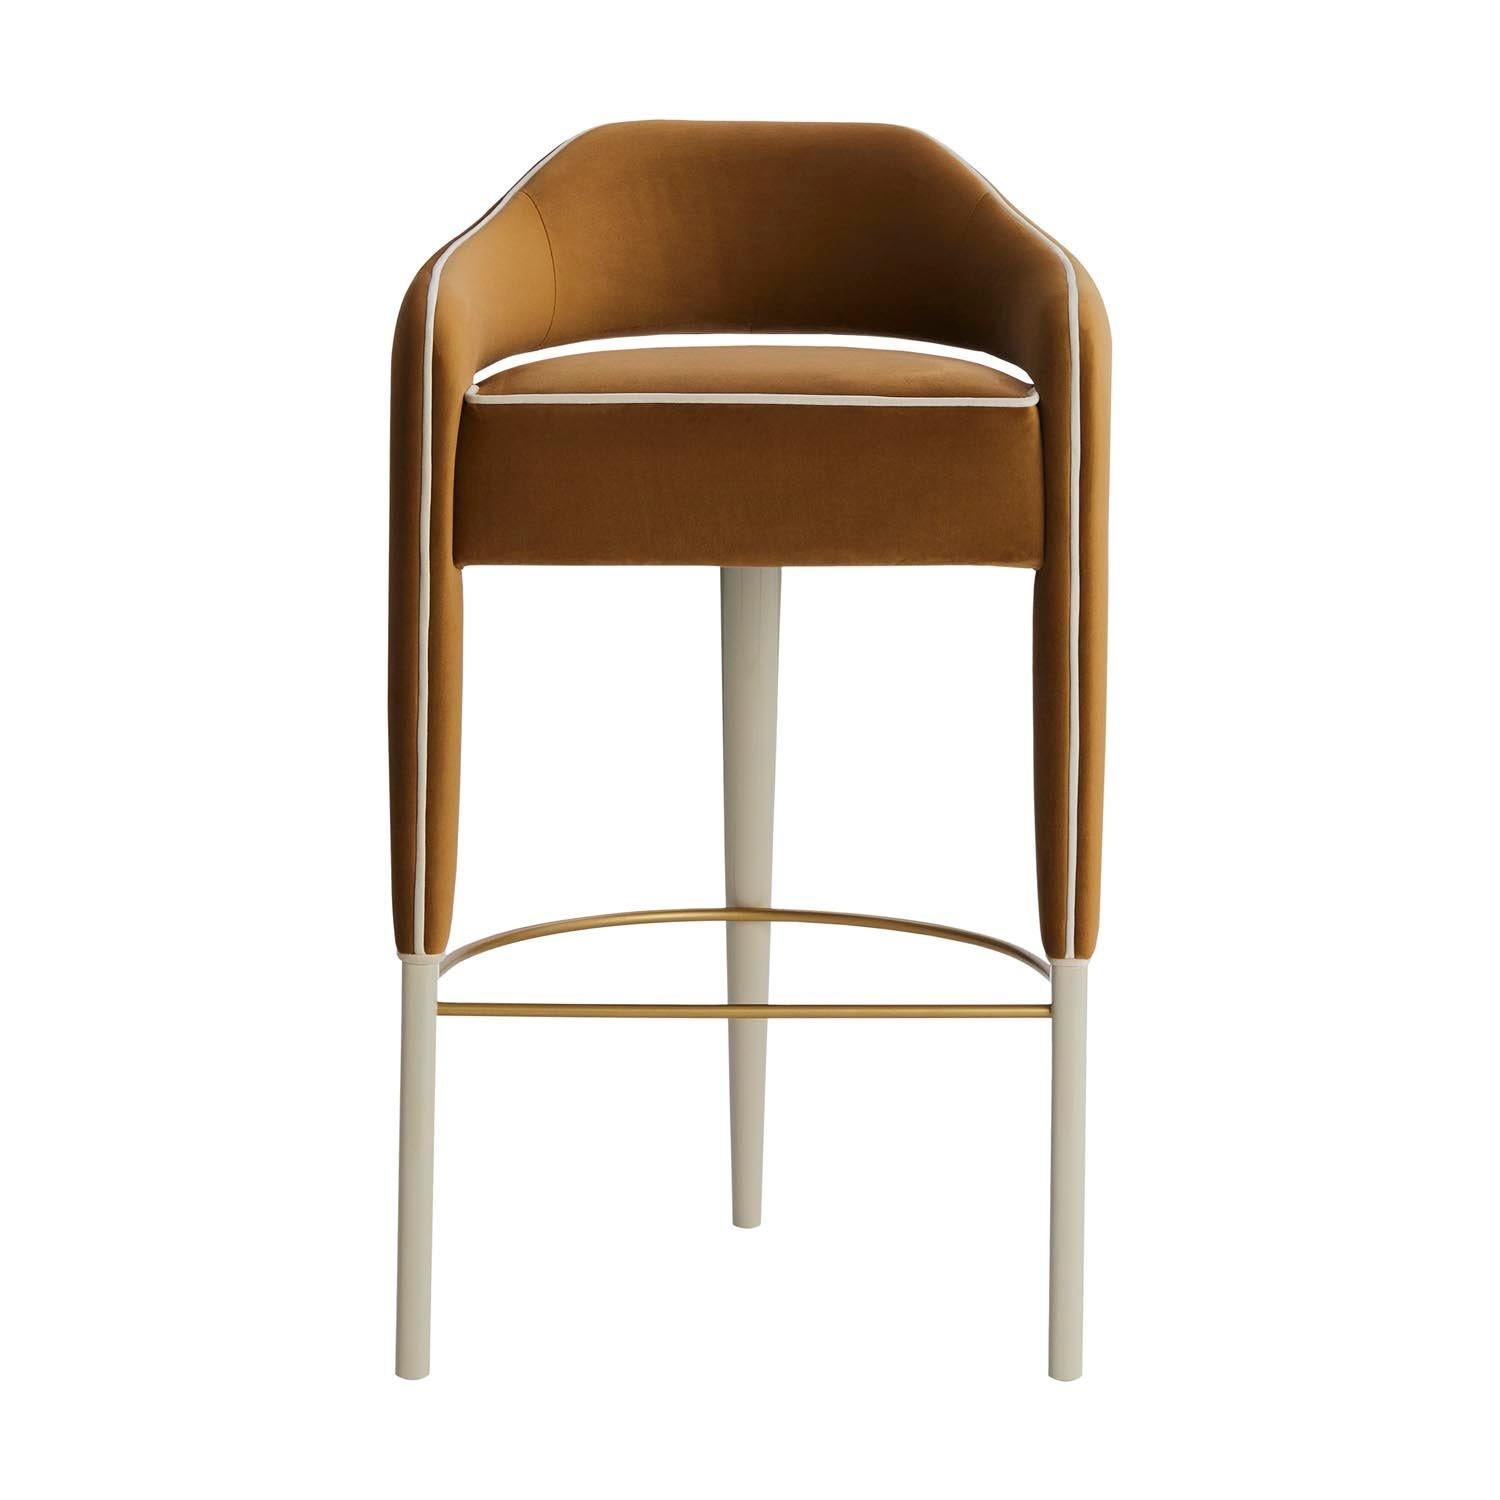 With a unique design, the INVICTA bar stool completely captures the attention.‎ Upholstered in fabric, this stool is made even more special by the beautiful detail of the seamless piping that runs from the back to the legs, finishing in a lacquered